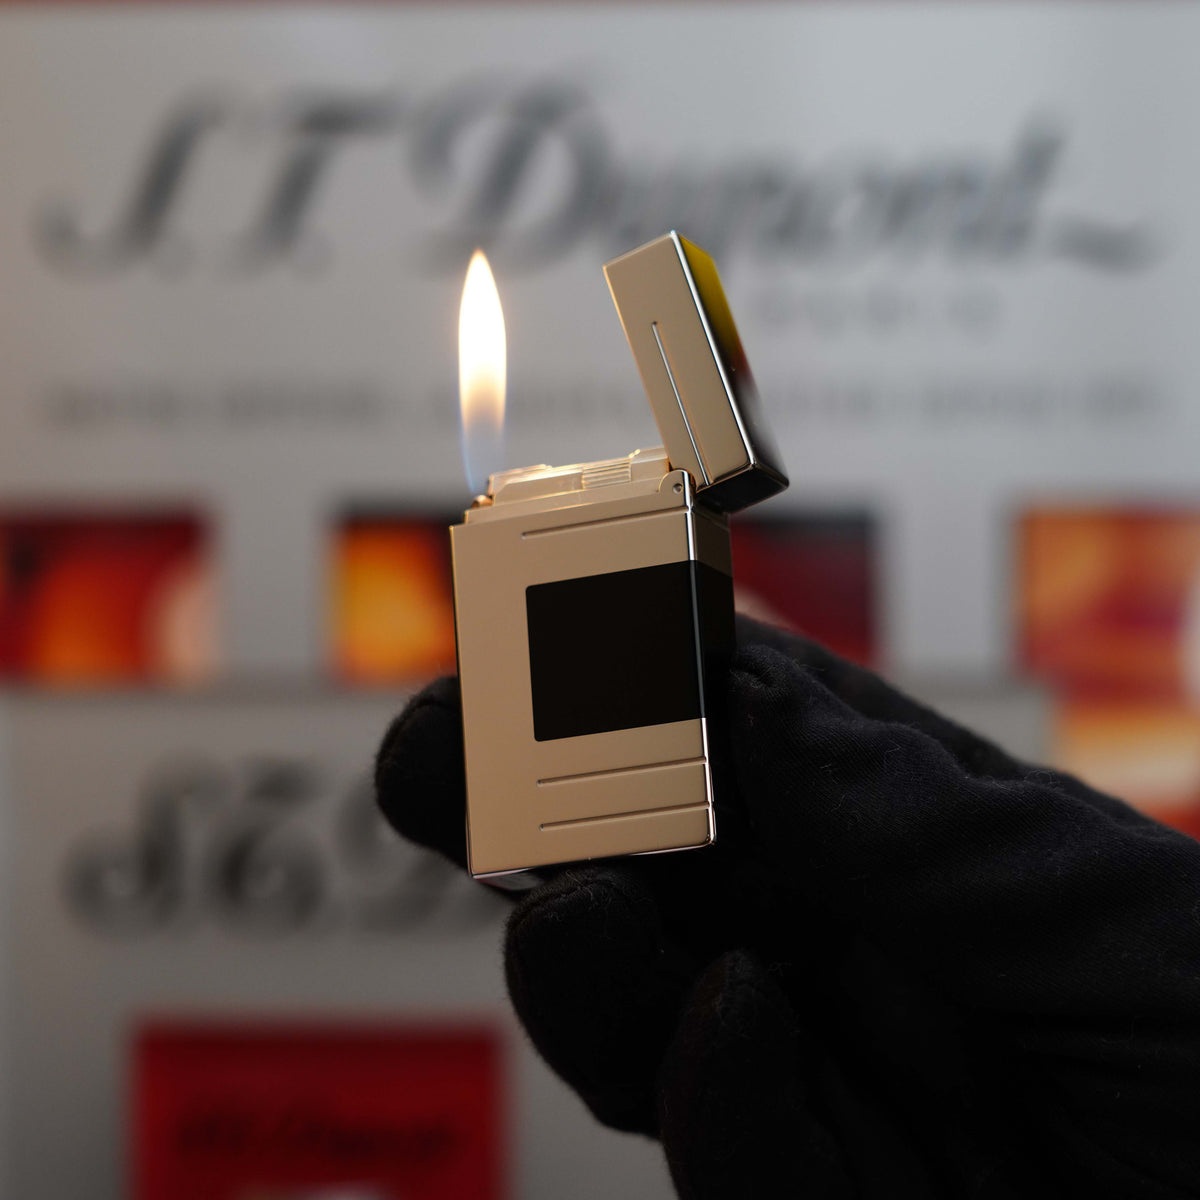 A hand in a black glove holding a lit, Vintage 1999 S.T. Dupont Ligne 1 Limited Edition Platinum finish natural Black Lacquer lighter with a black square on it, against a blurred background featuring text and images.